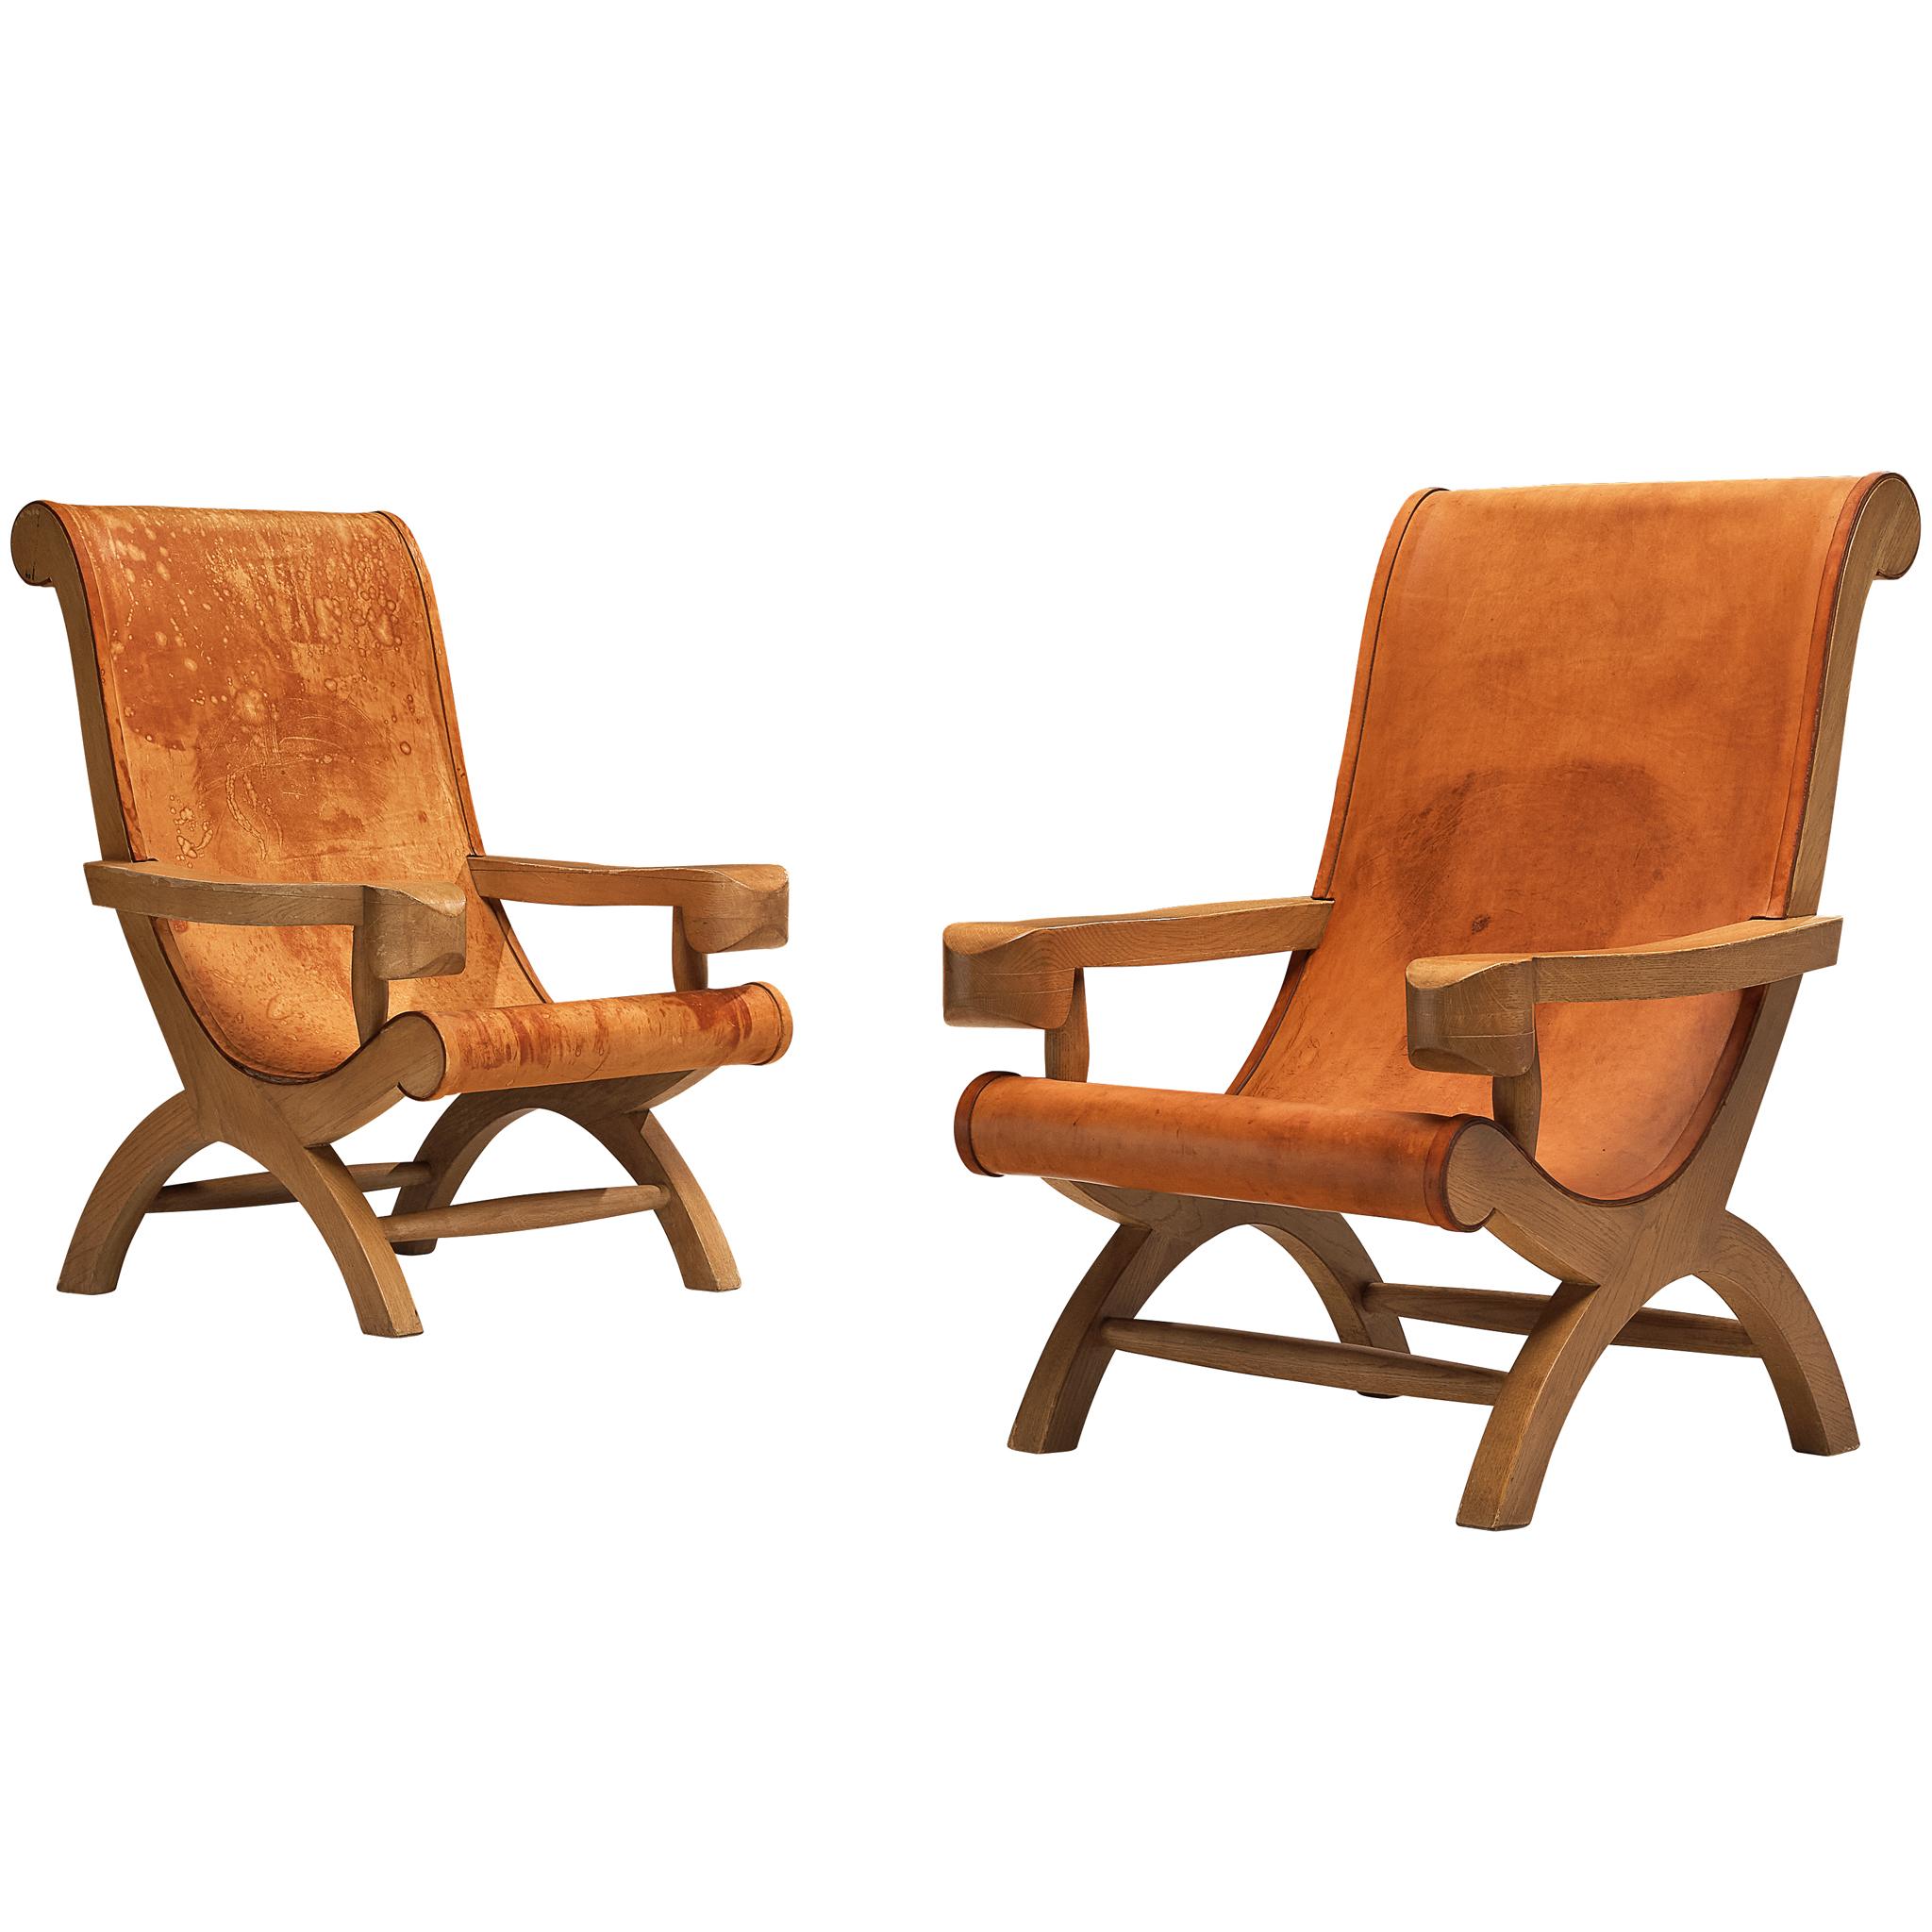 Clara Porset Lounge Chairs 'Butaque' in Original Patinated Leather For Sale